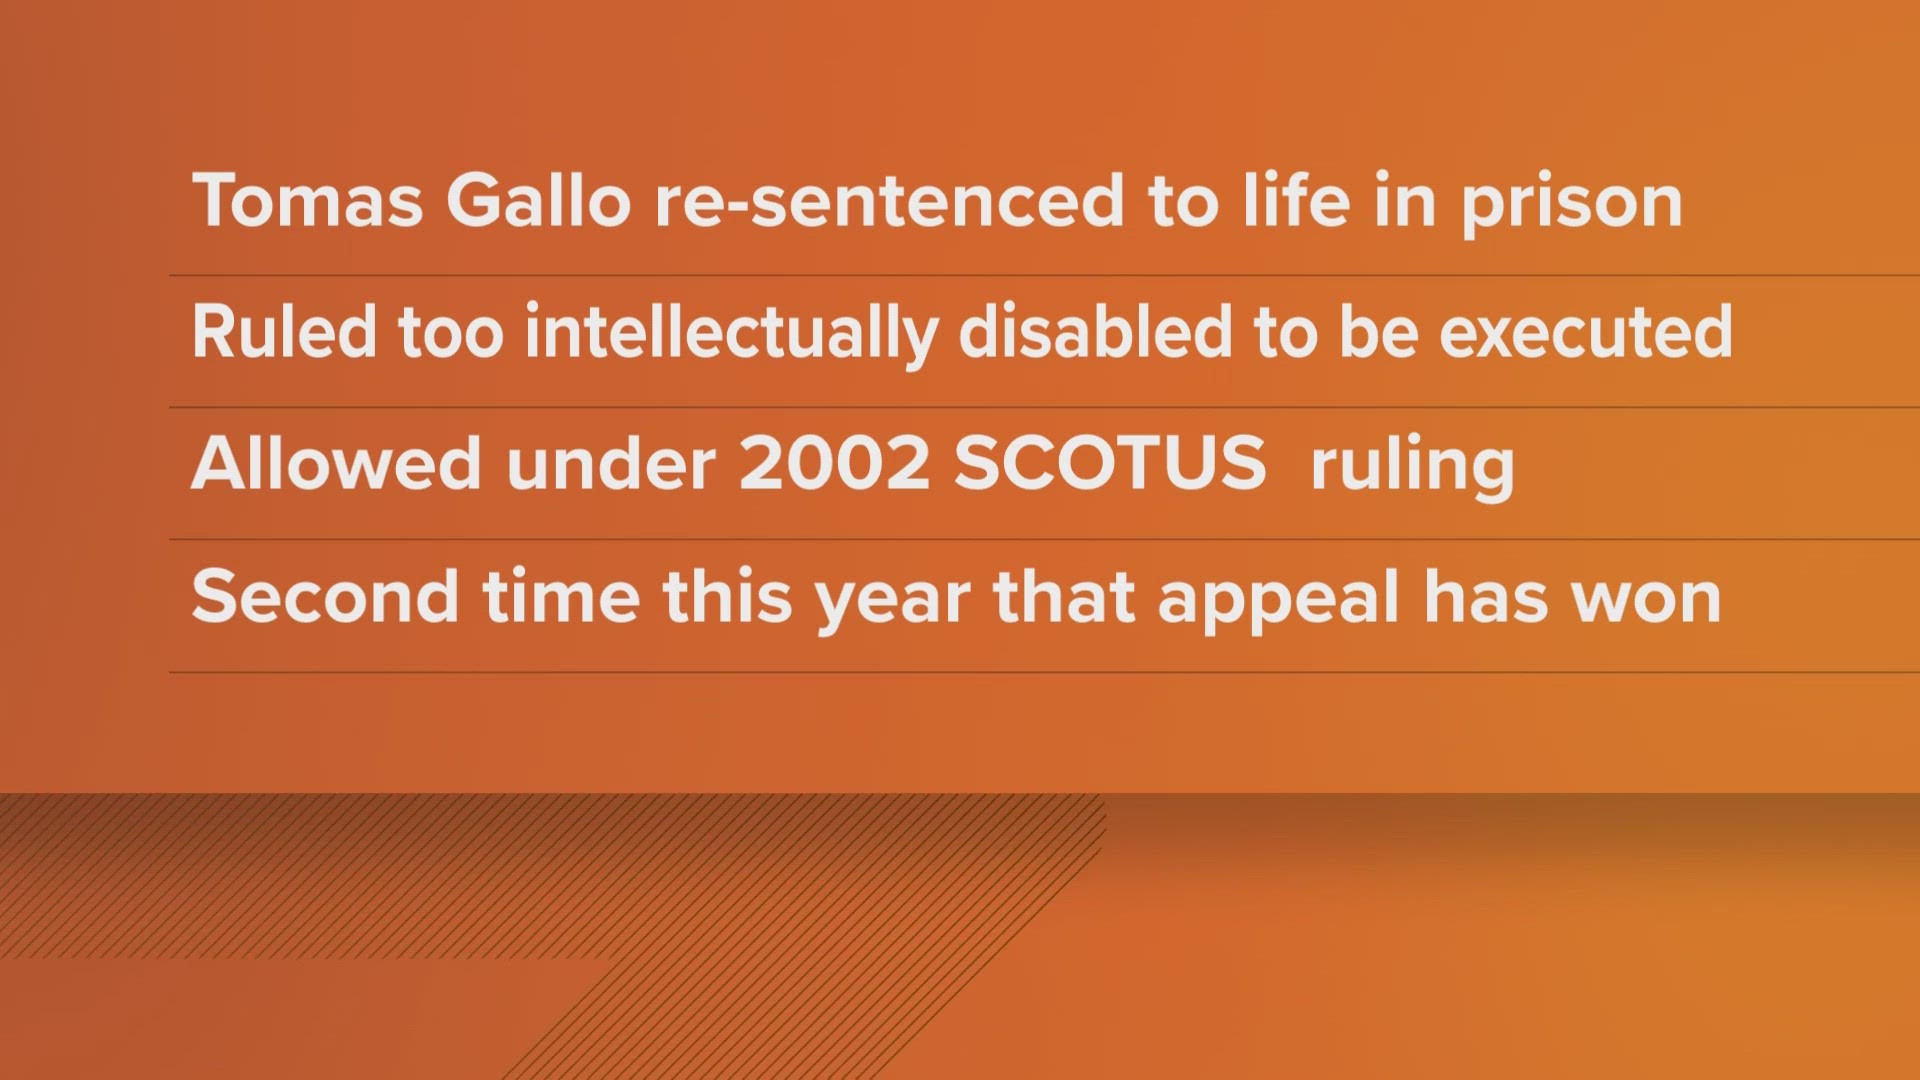 Thomas Gallo has instead been re-sentenced to life in prison for the murder of his girlfriend's three-year-old child.